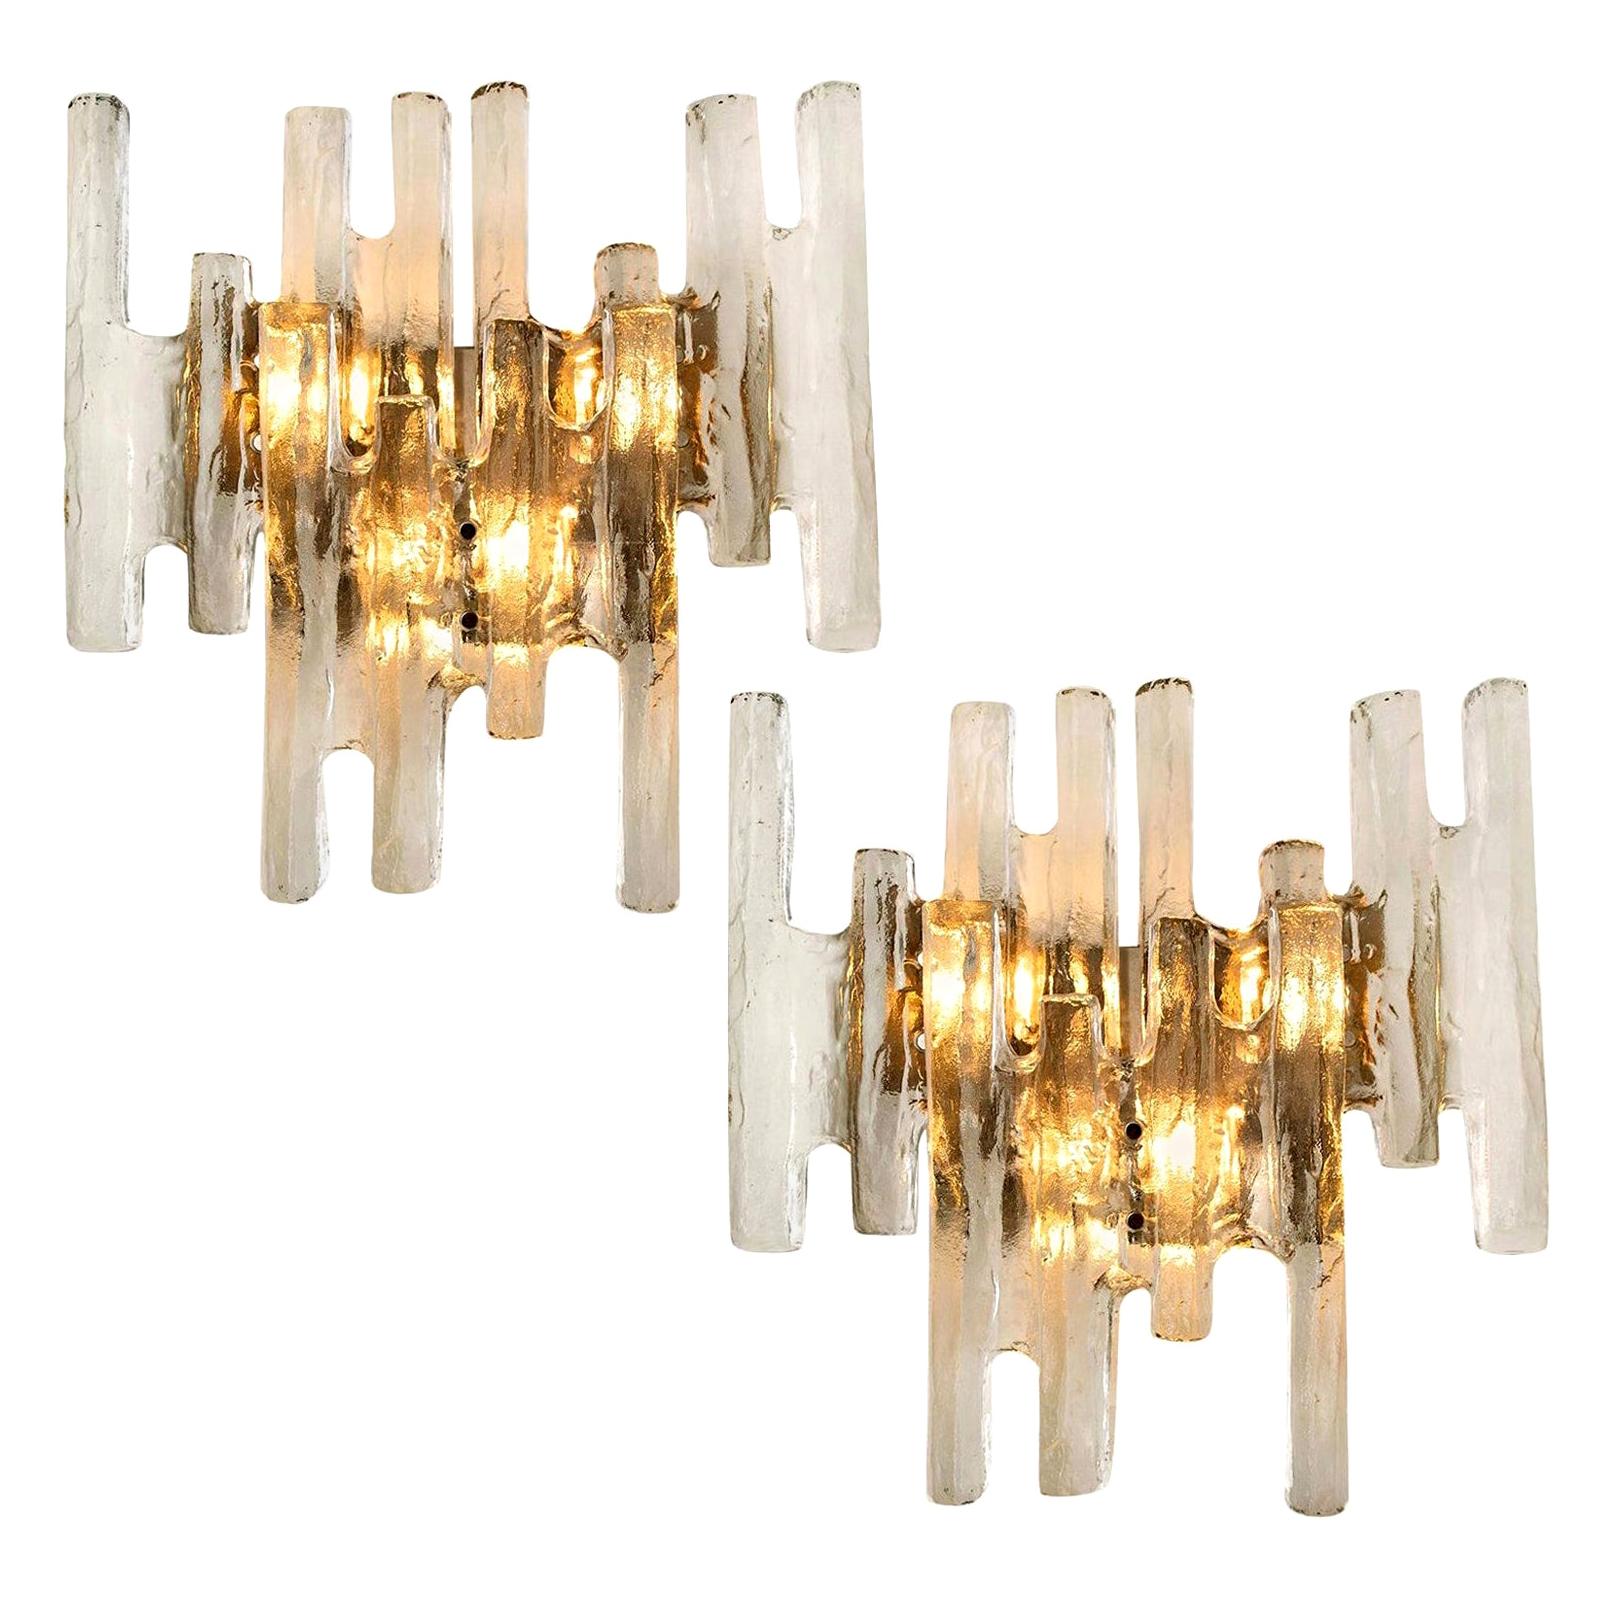 A pair of elegant modern wall lights or sconces, manufactured by J.T. Kalmar Austria in the 1970s. Lovely design, executed to a very high standard. The wall light solid ice glass sheets dangling on it.

Clean lines to complement all decors. The